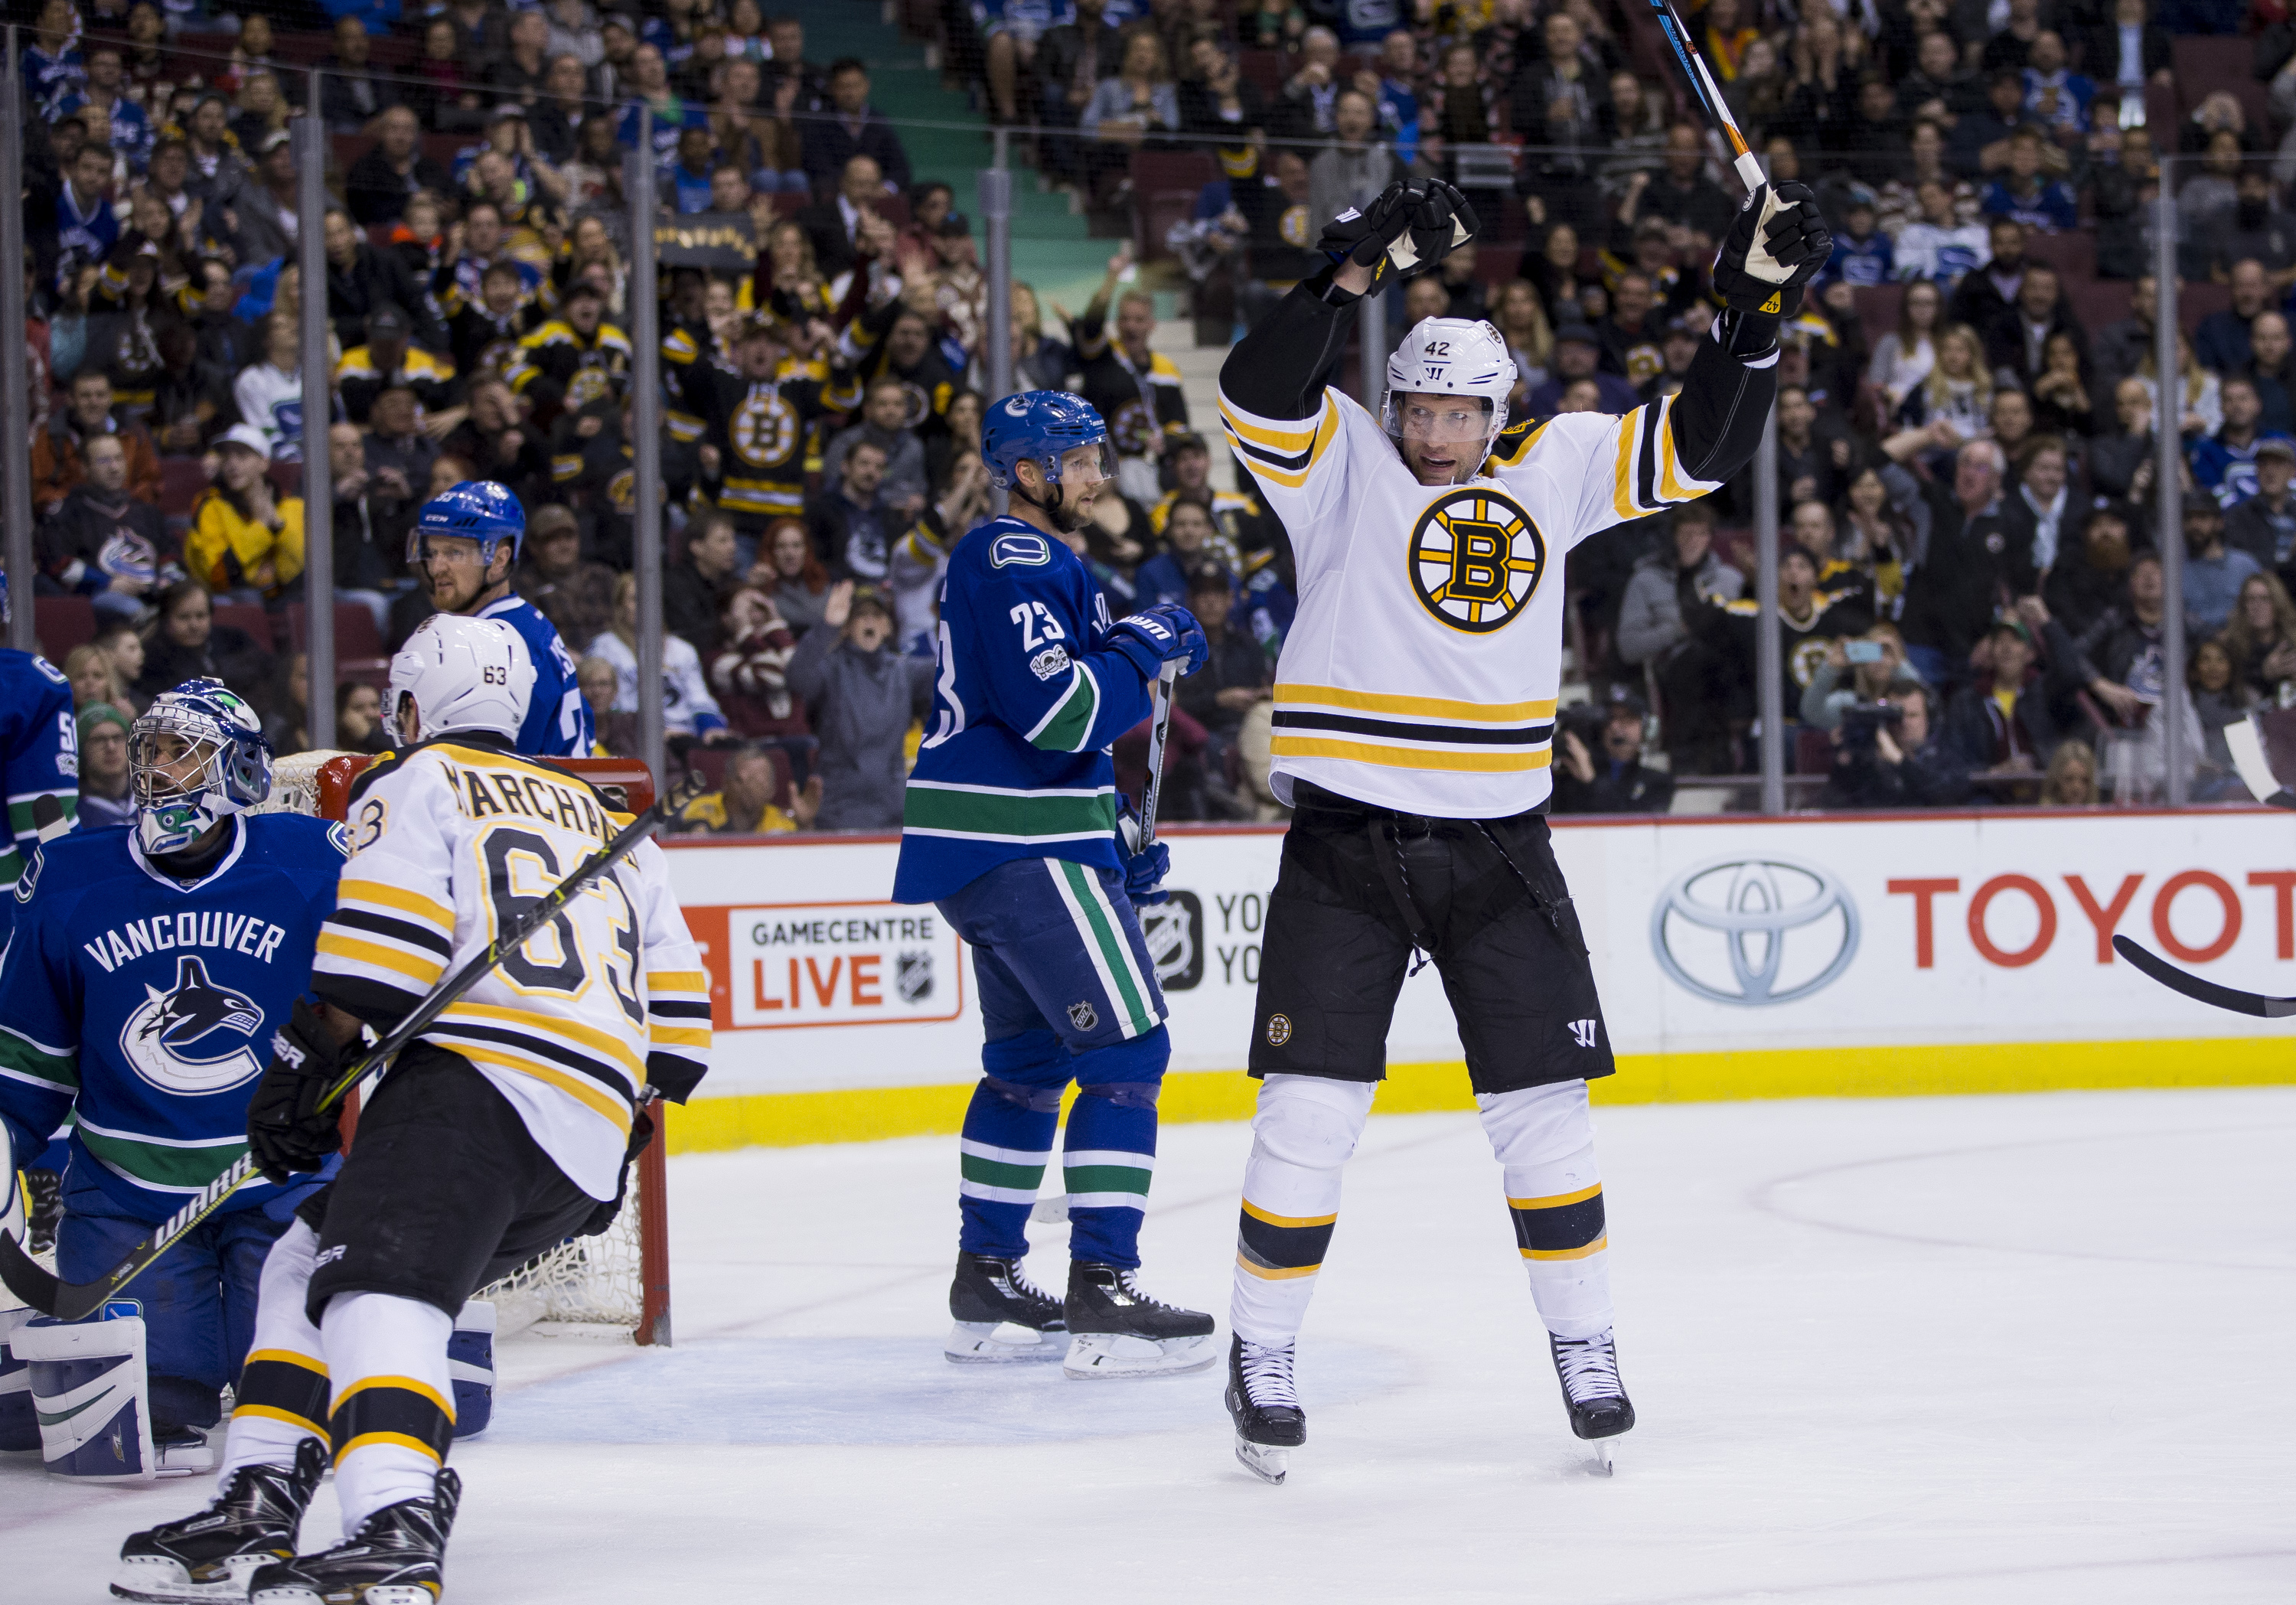 Toronto Star's Website Mistakenly Declares Canucks Stanley Cup Champions  Following Game 6 Loss to Bruins 